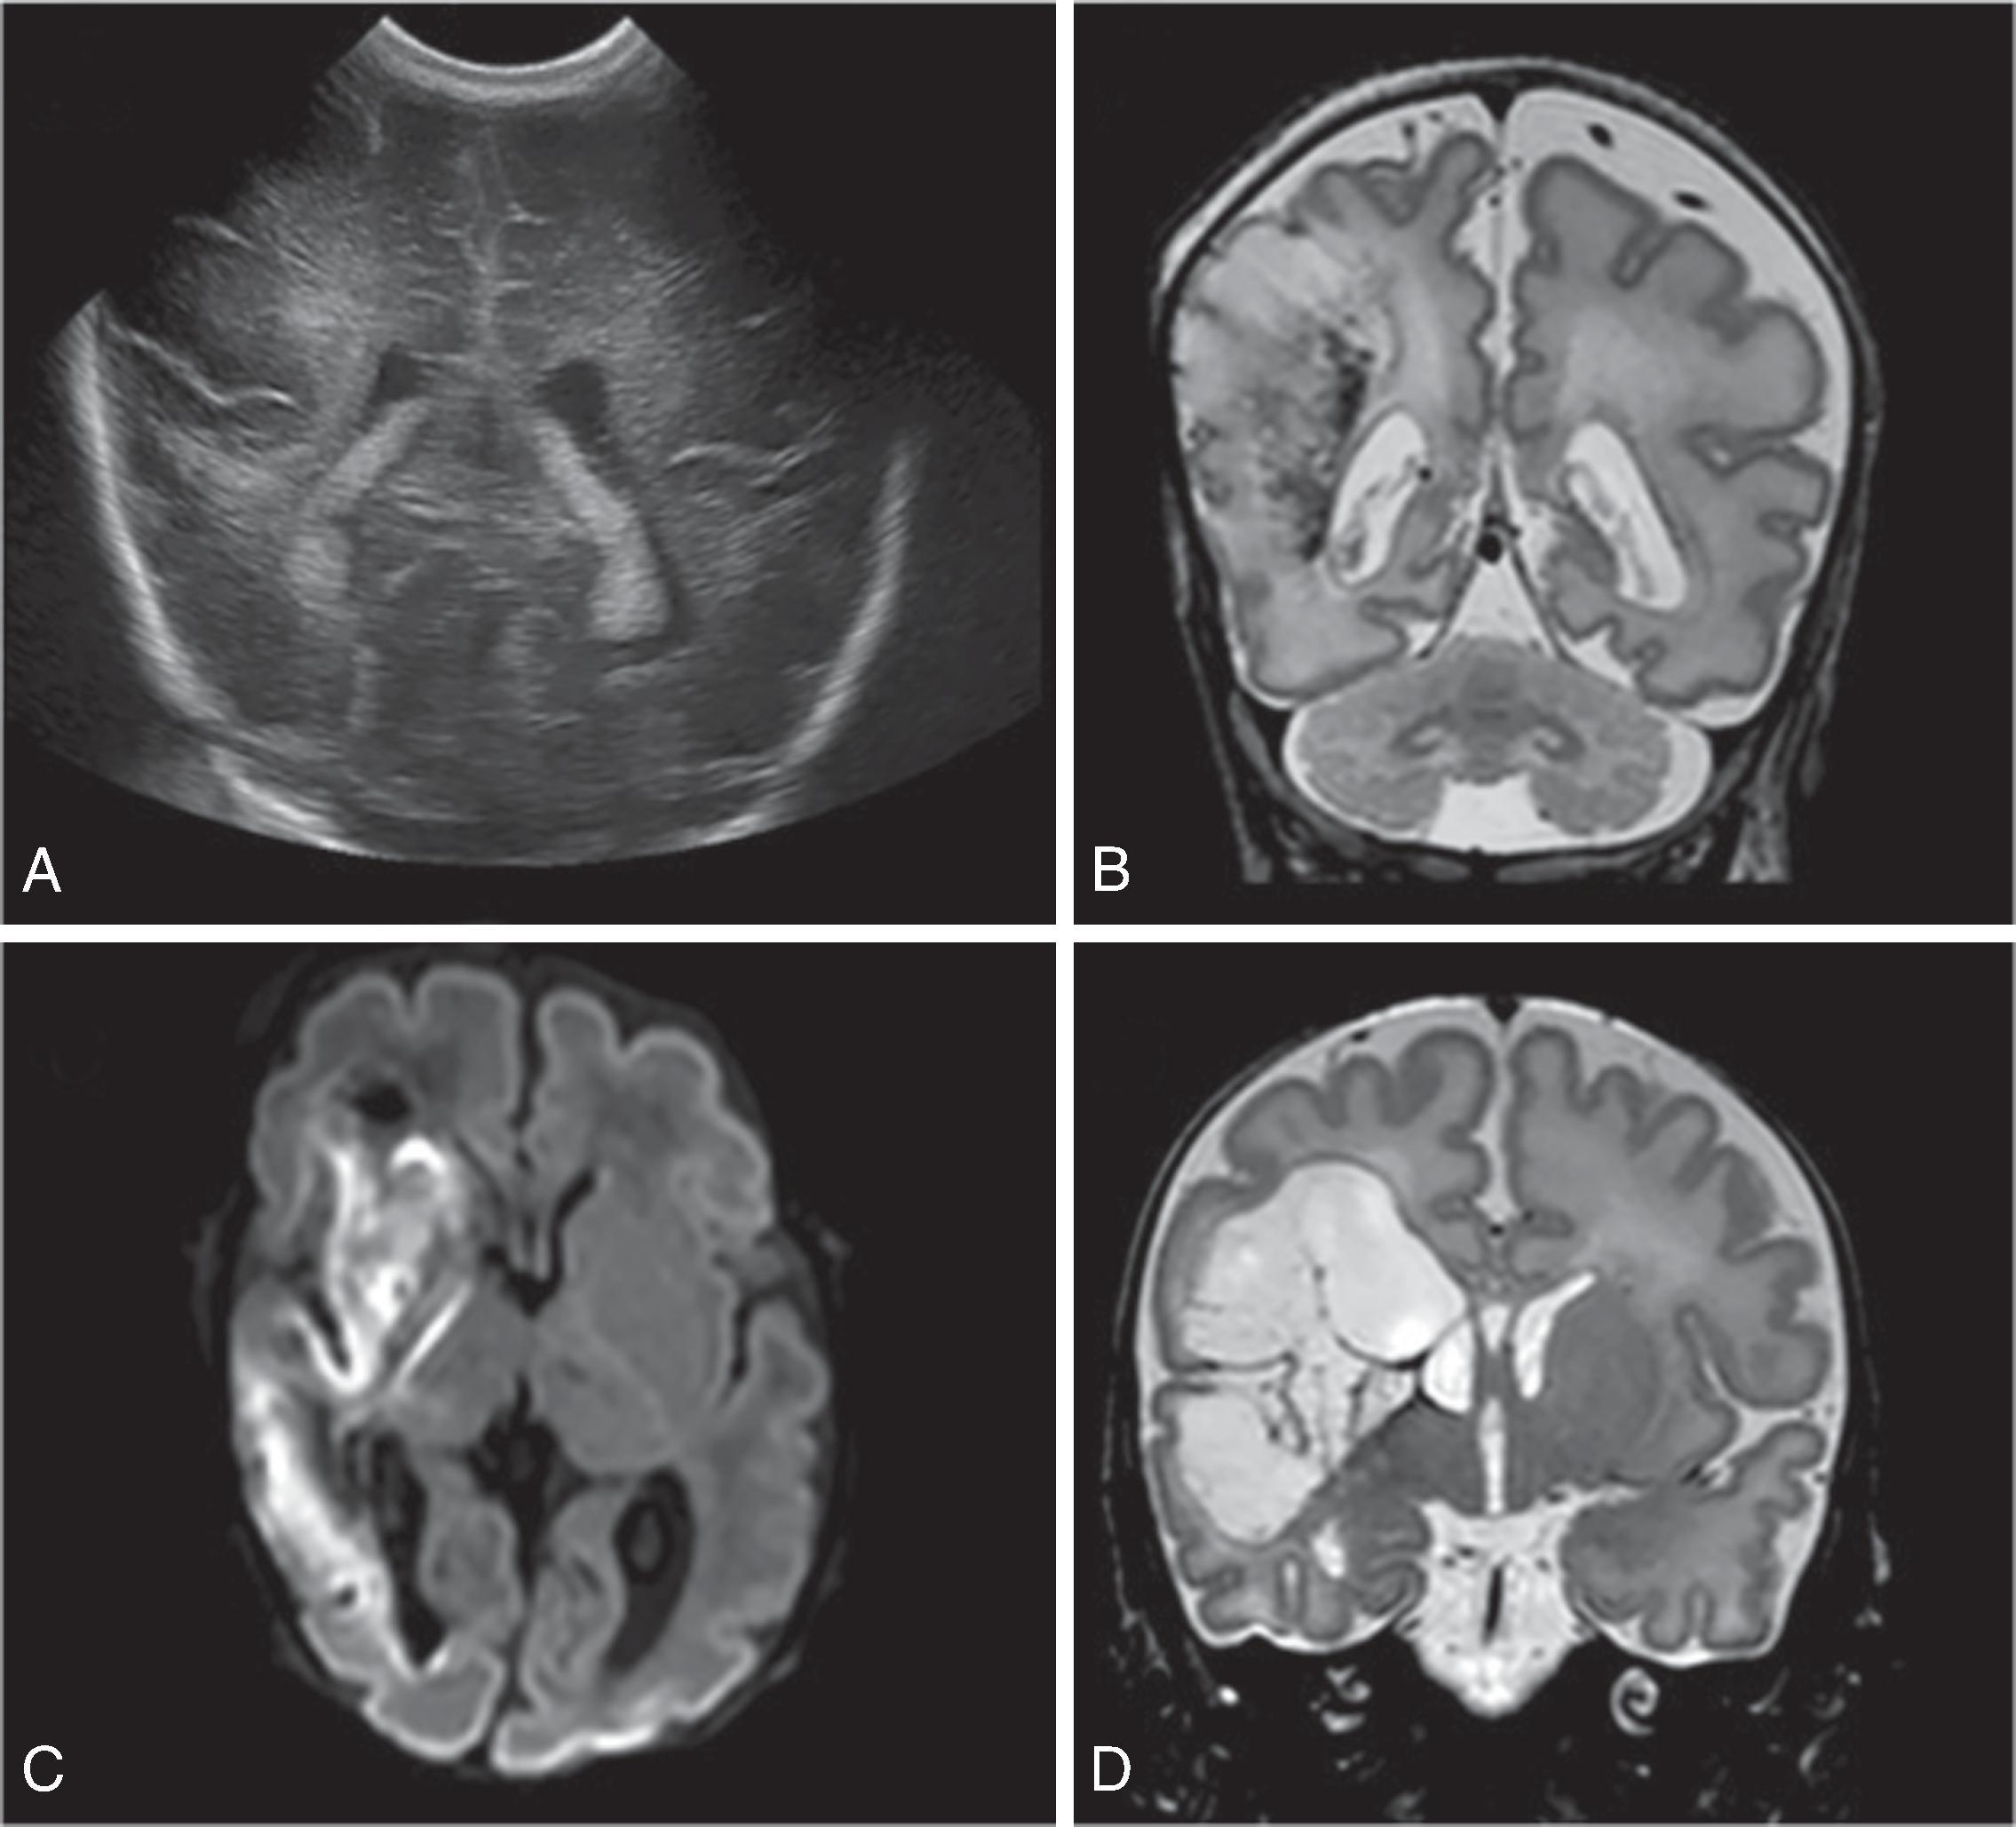 Fig. 96.6, Infants With Severe Systemic Illness Such as Necrotizing Enterocolitis (NEC) Can Develop Cerebral Changes .